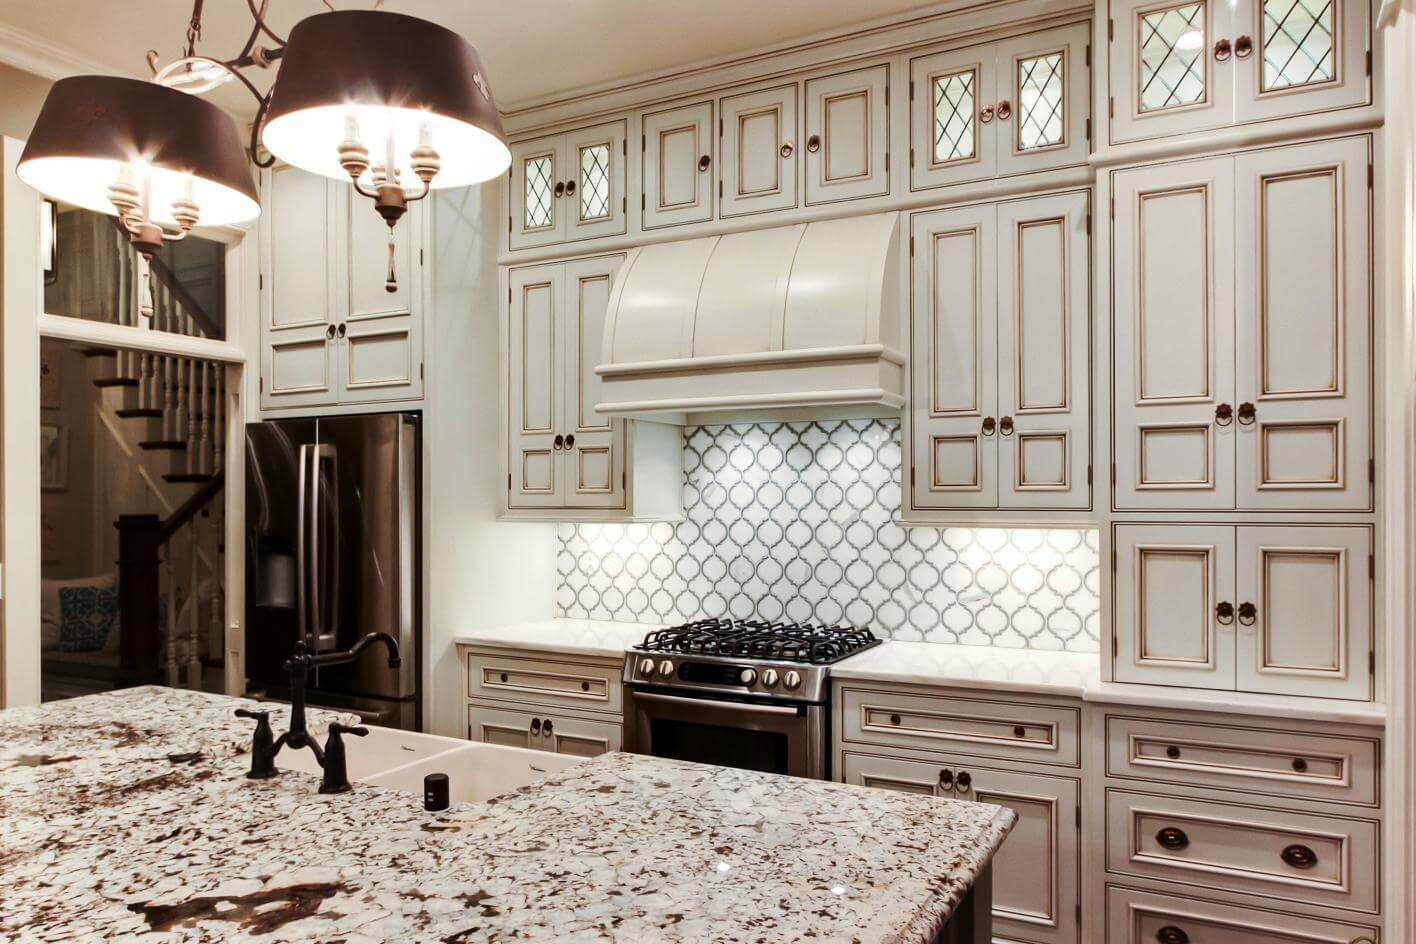 Kitchen back wall made of black and white hexagonal tiles white